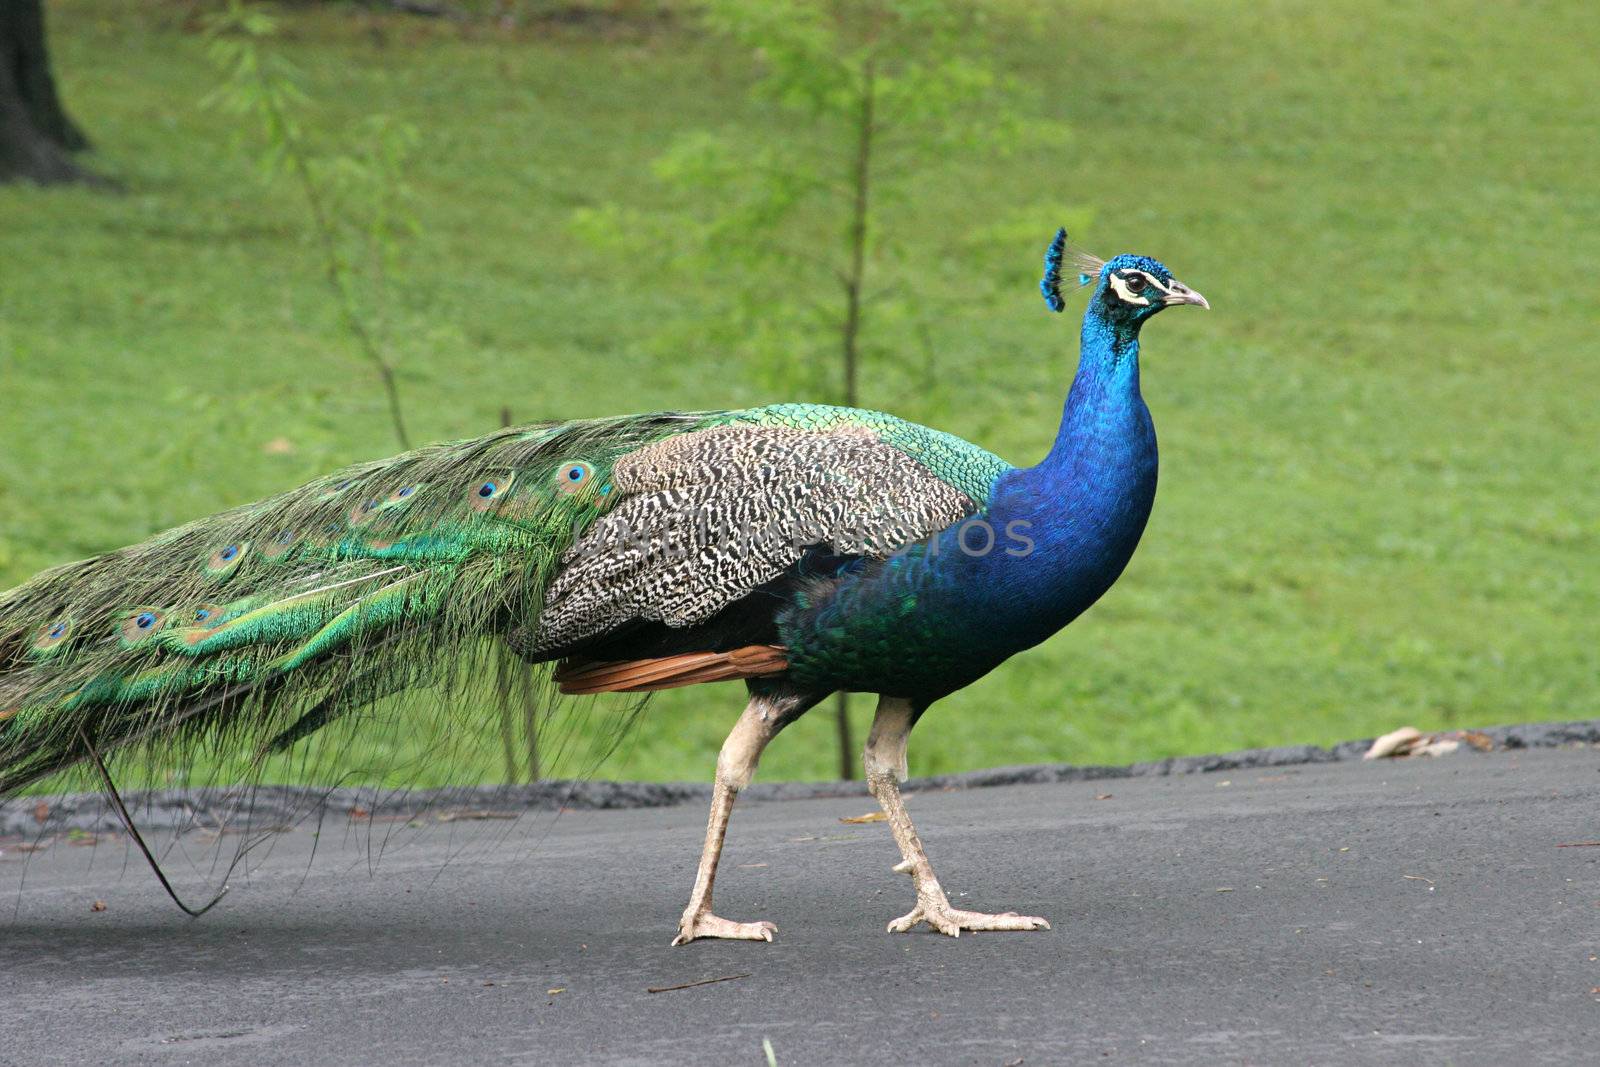 a bright blue male peacock with his tailfeathers closed